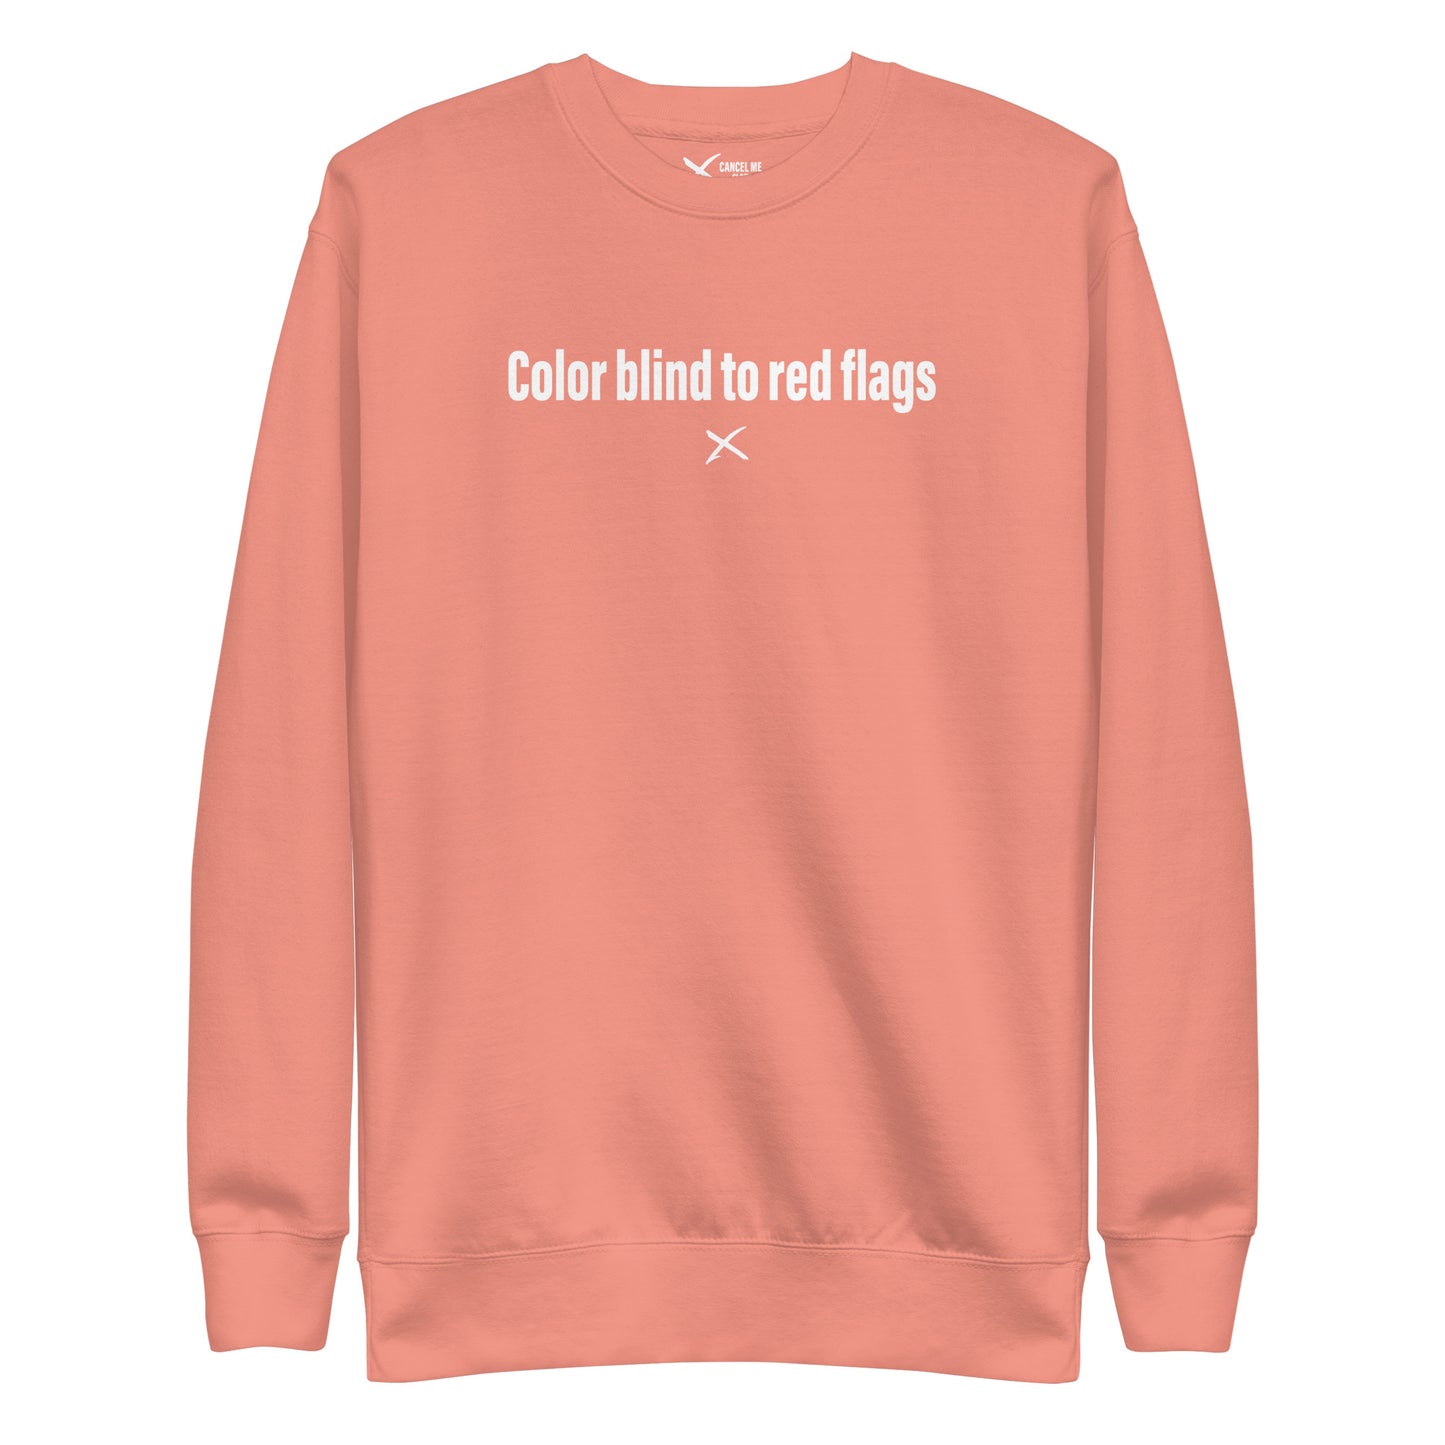 Color blind to red flags - Sweatshirt